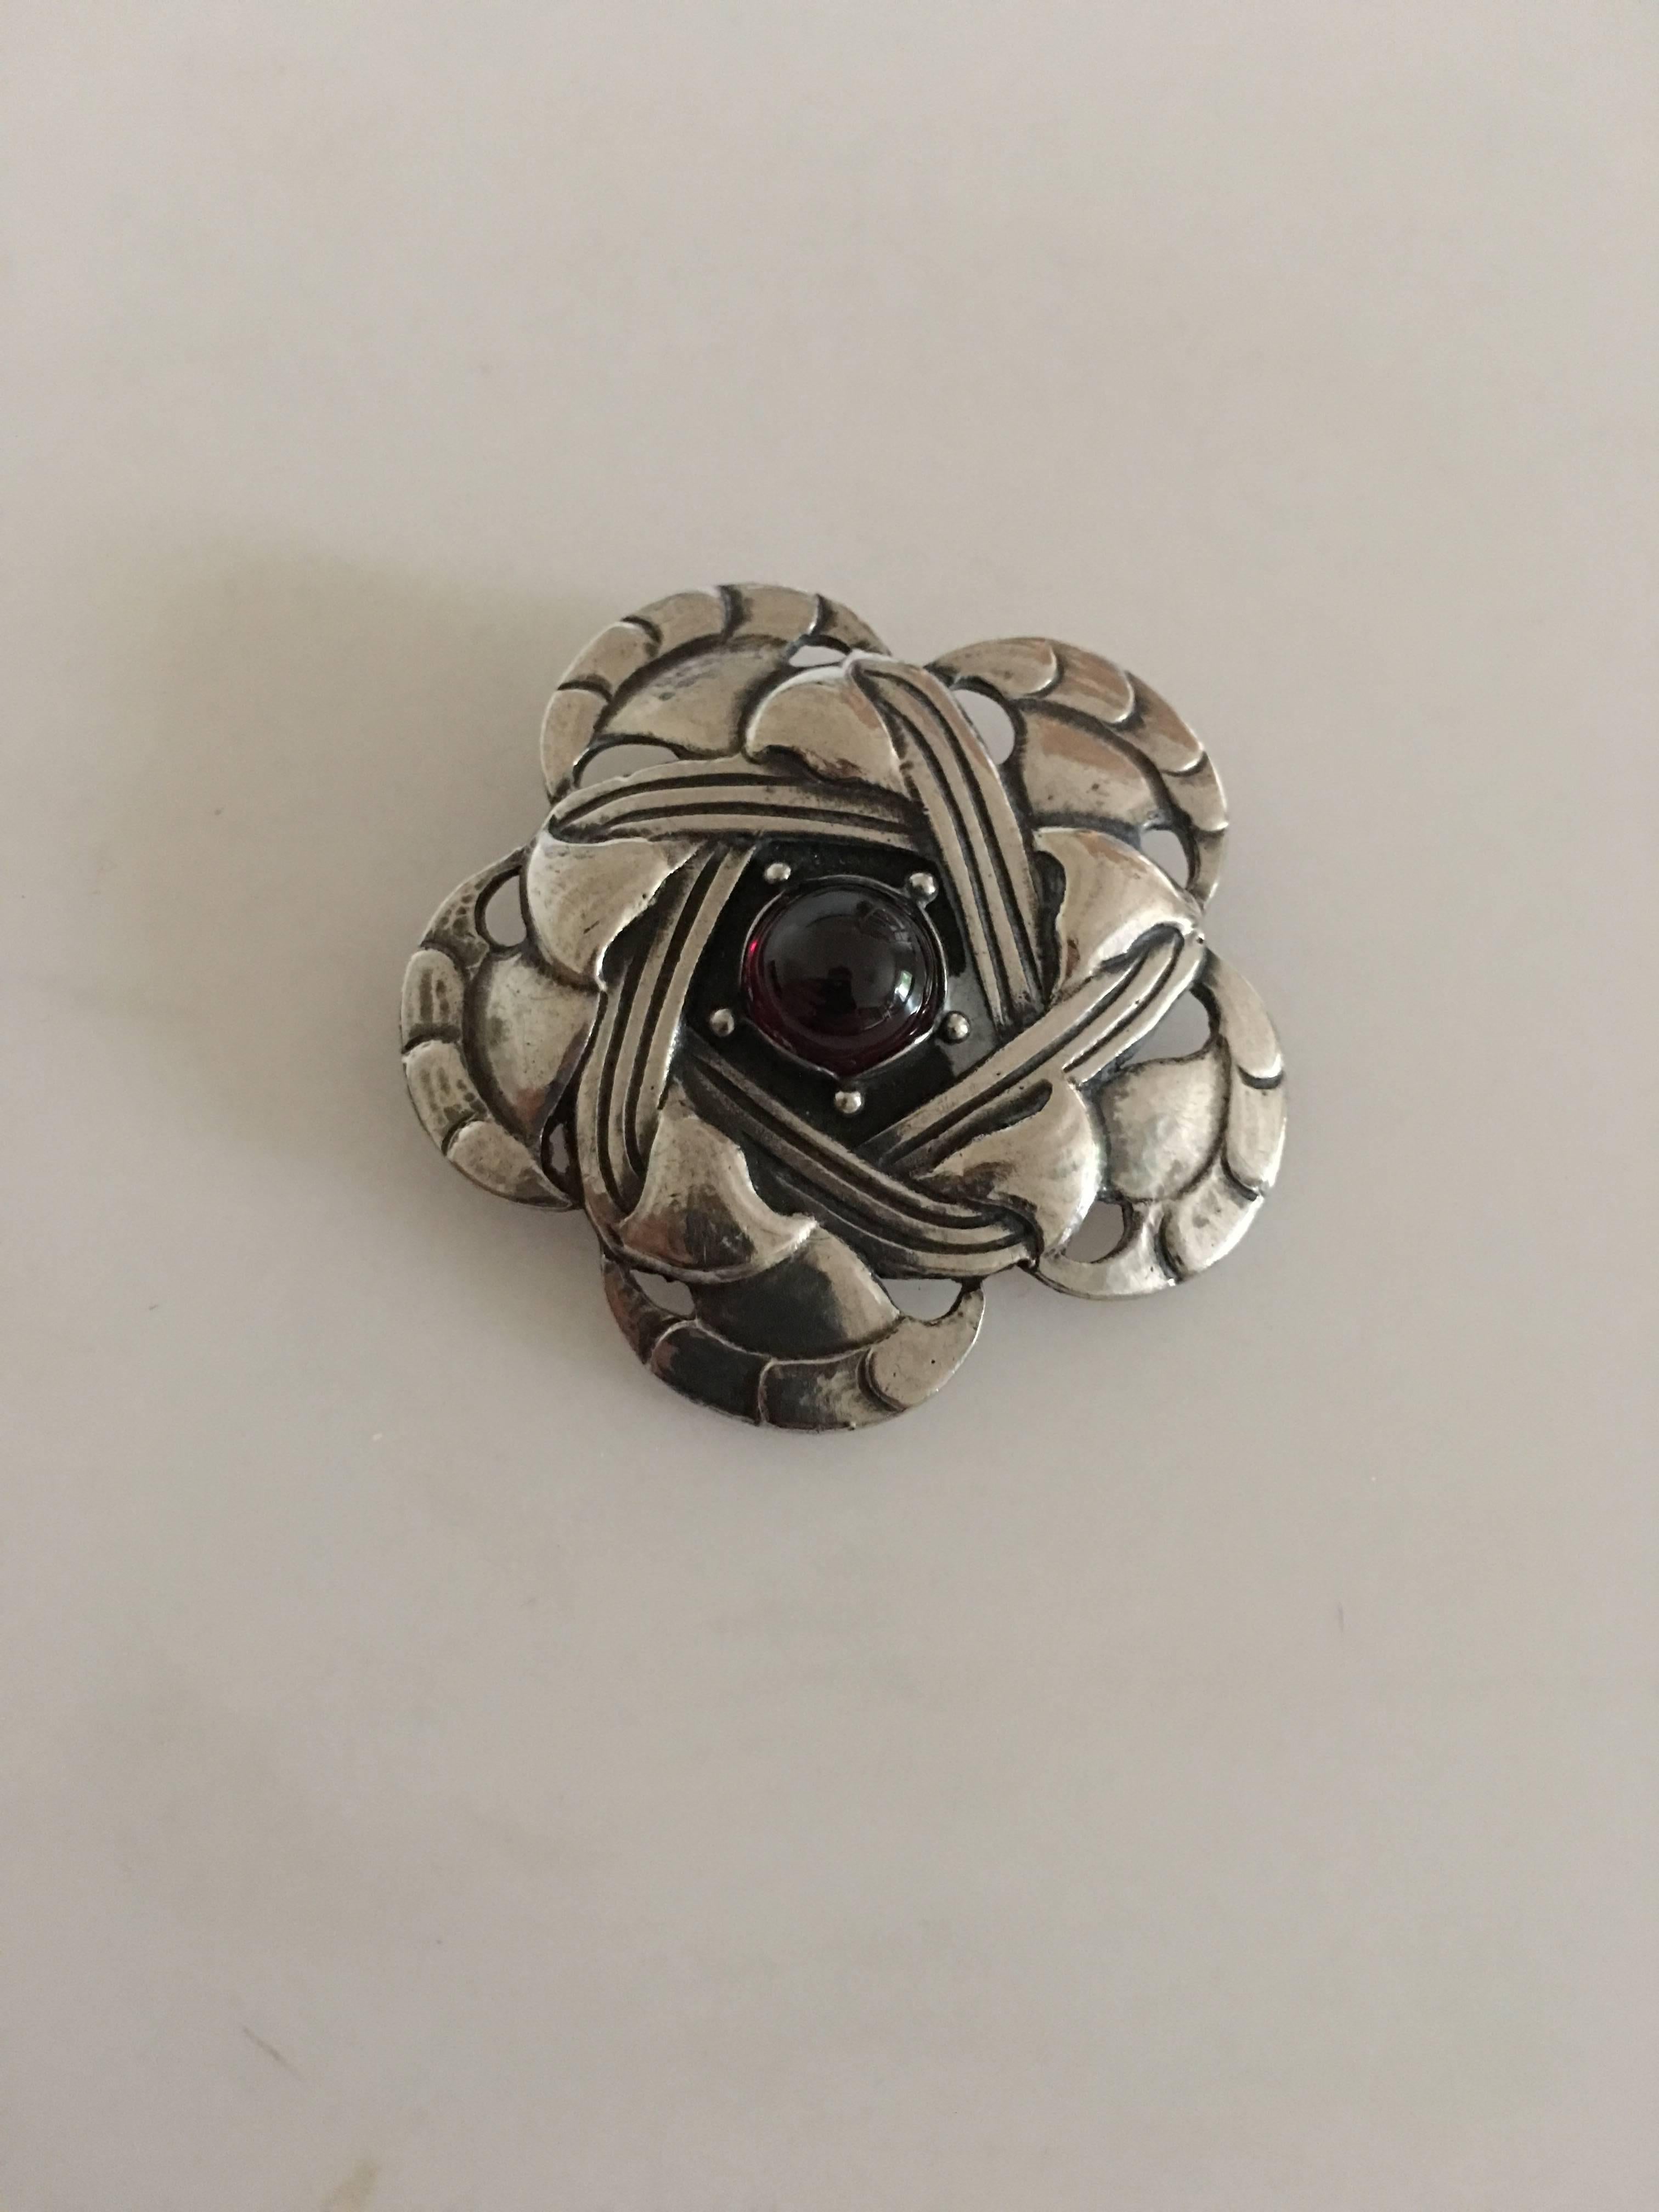 Early Georg Jensen Silver Brooch with Red Carnelian. Measures 4 cm diameter, weighs 12 grams (0.40 oz). Manufactured 1909-1914. In beautiful condition.